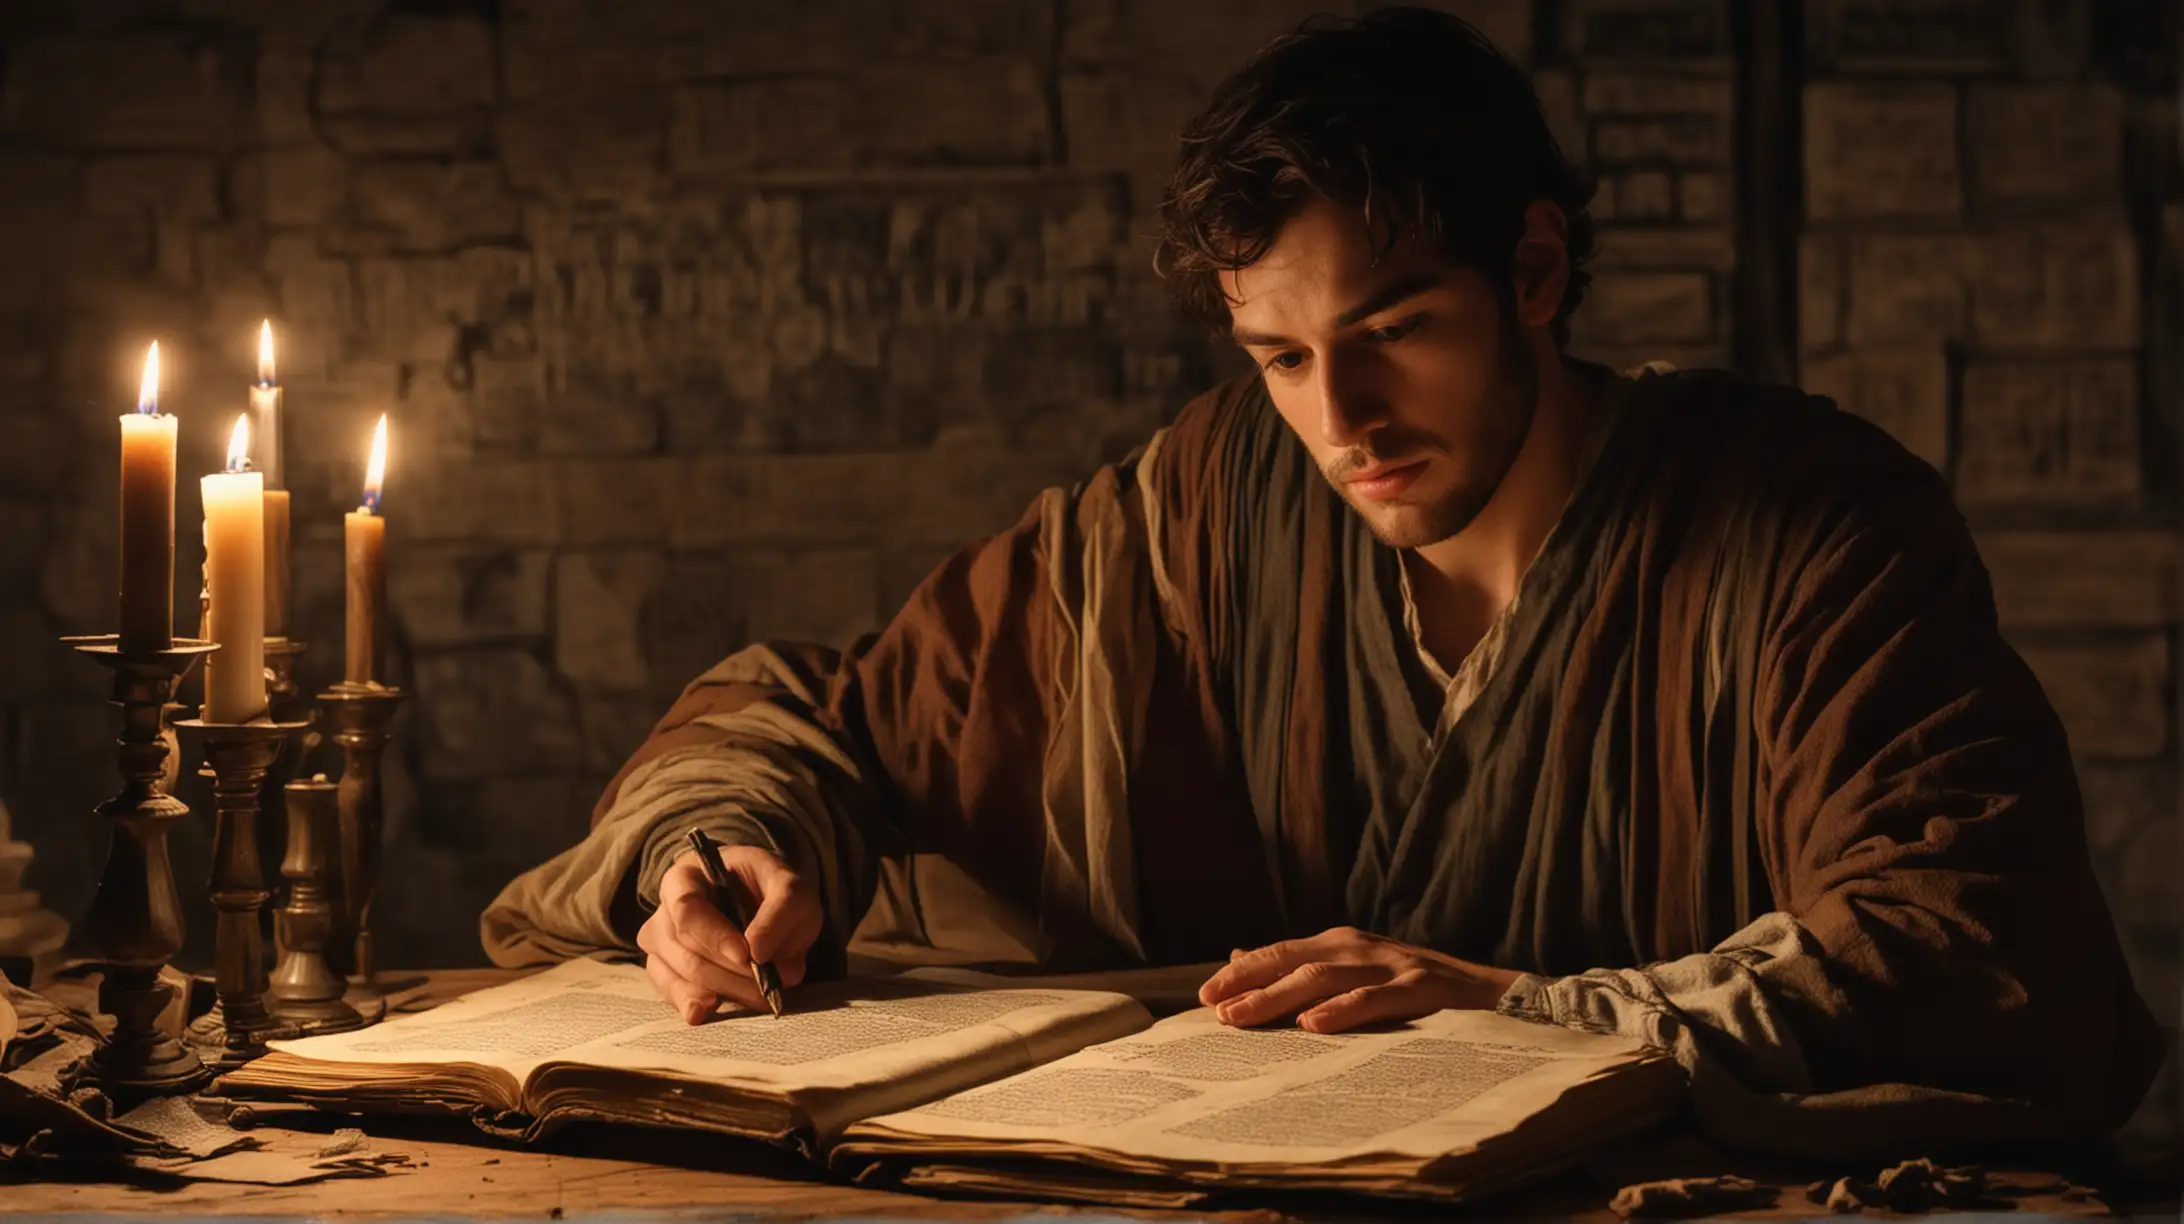 a closeup of Ezra from the Bible, Sitting at a wooden table by candlelight, working on some old manuscripts,